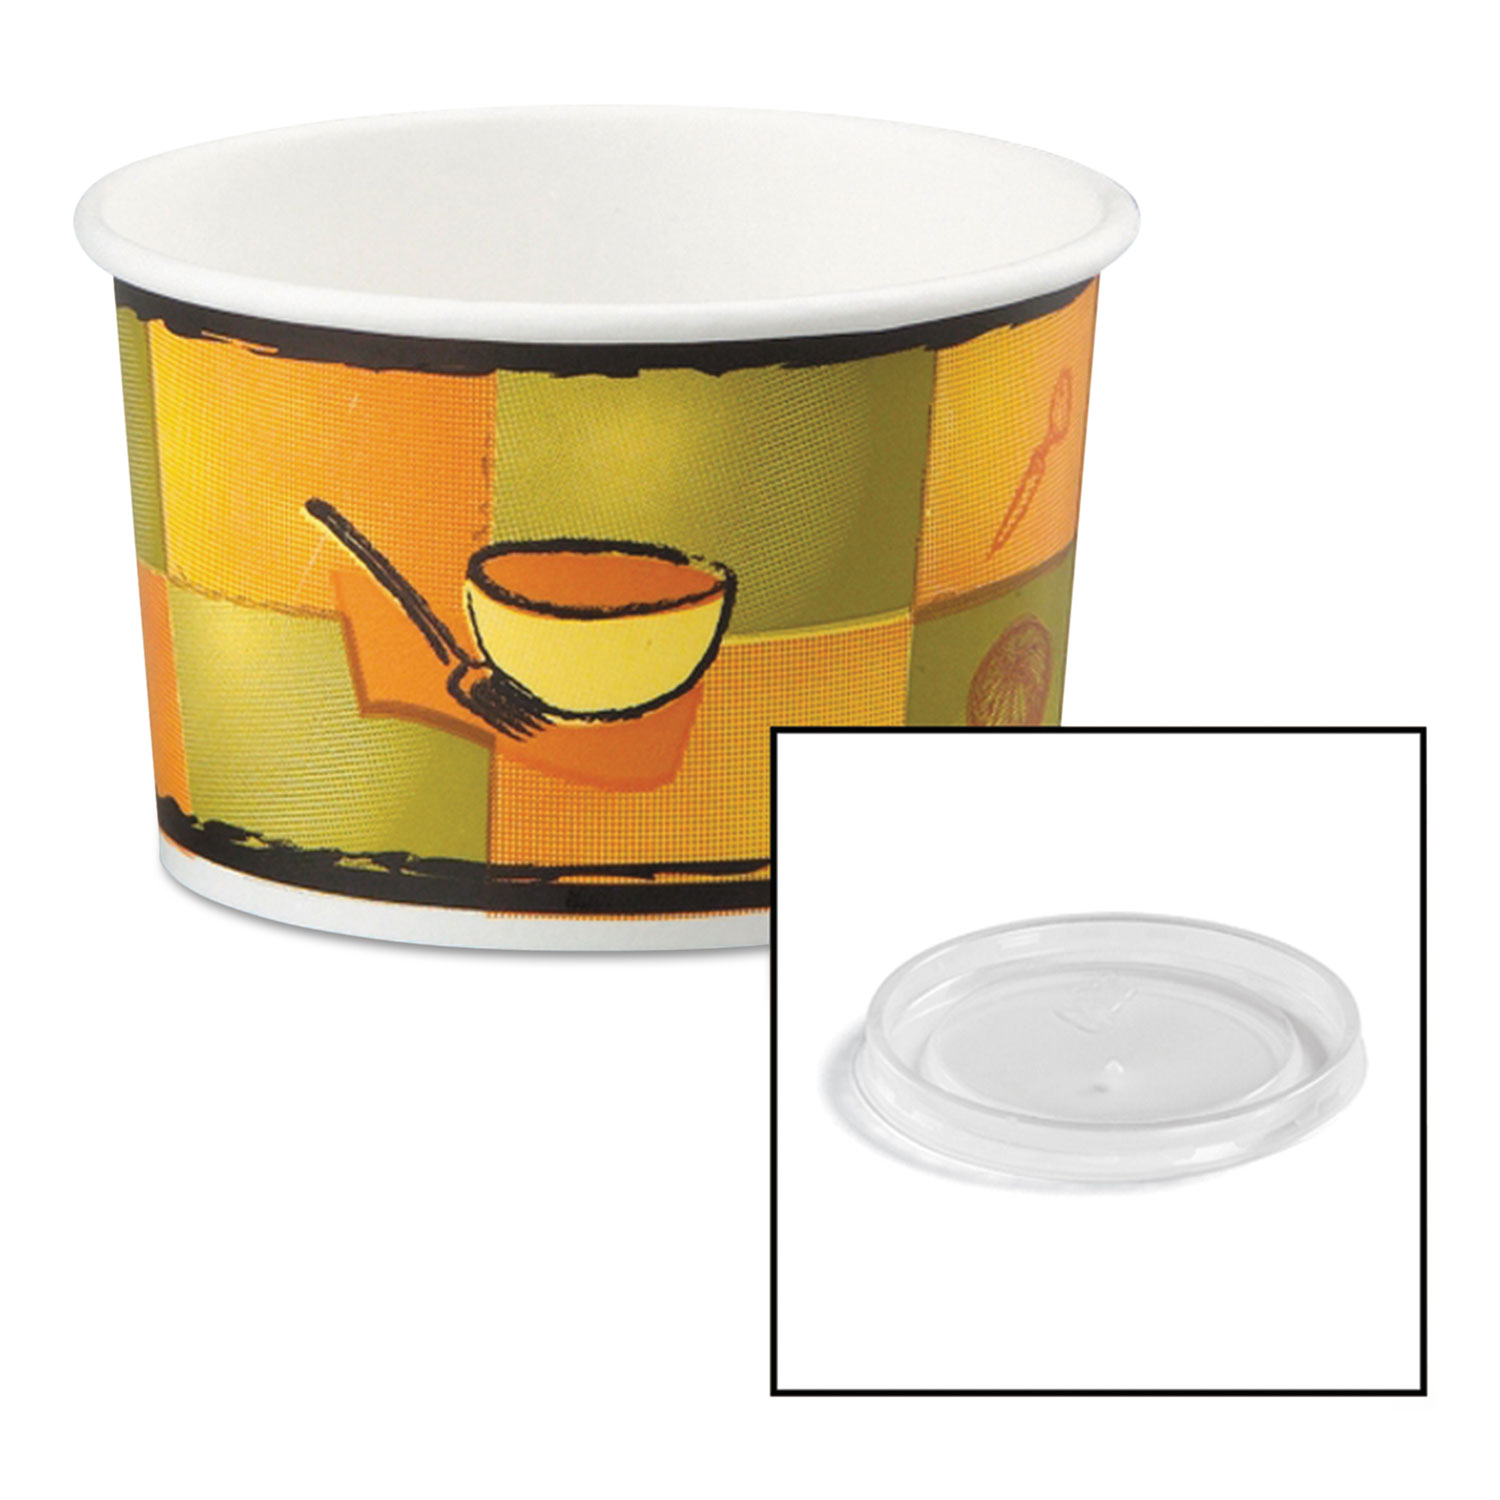  Chinet 70408 Streetside Paper Food Container w/Plastic Lid, Streetside Design, 8-10oz, 250/CT (HUH70408) 